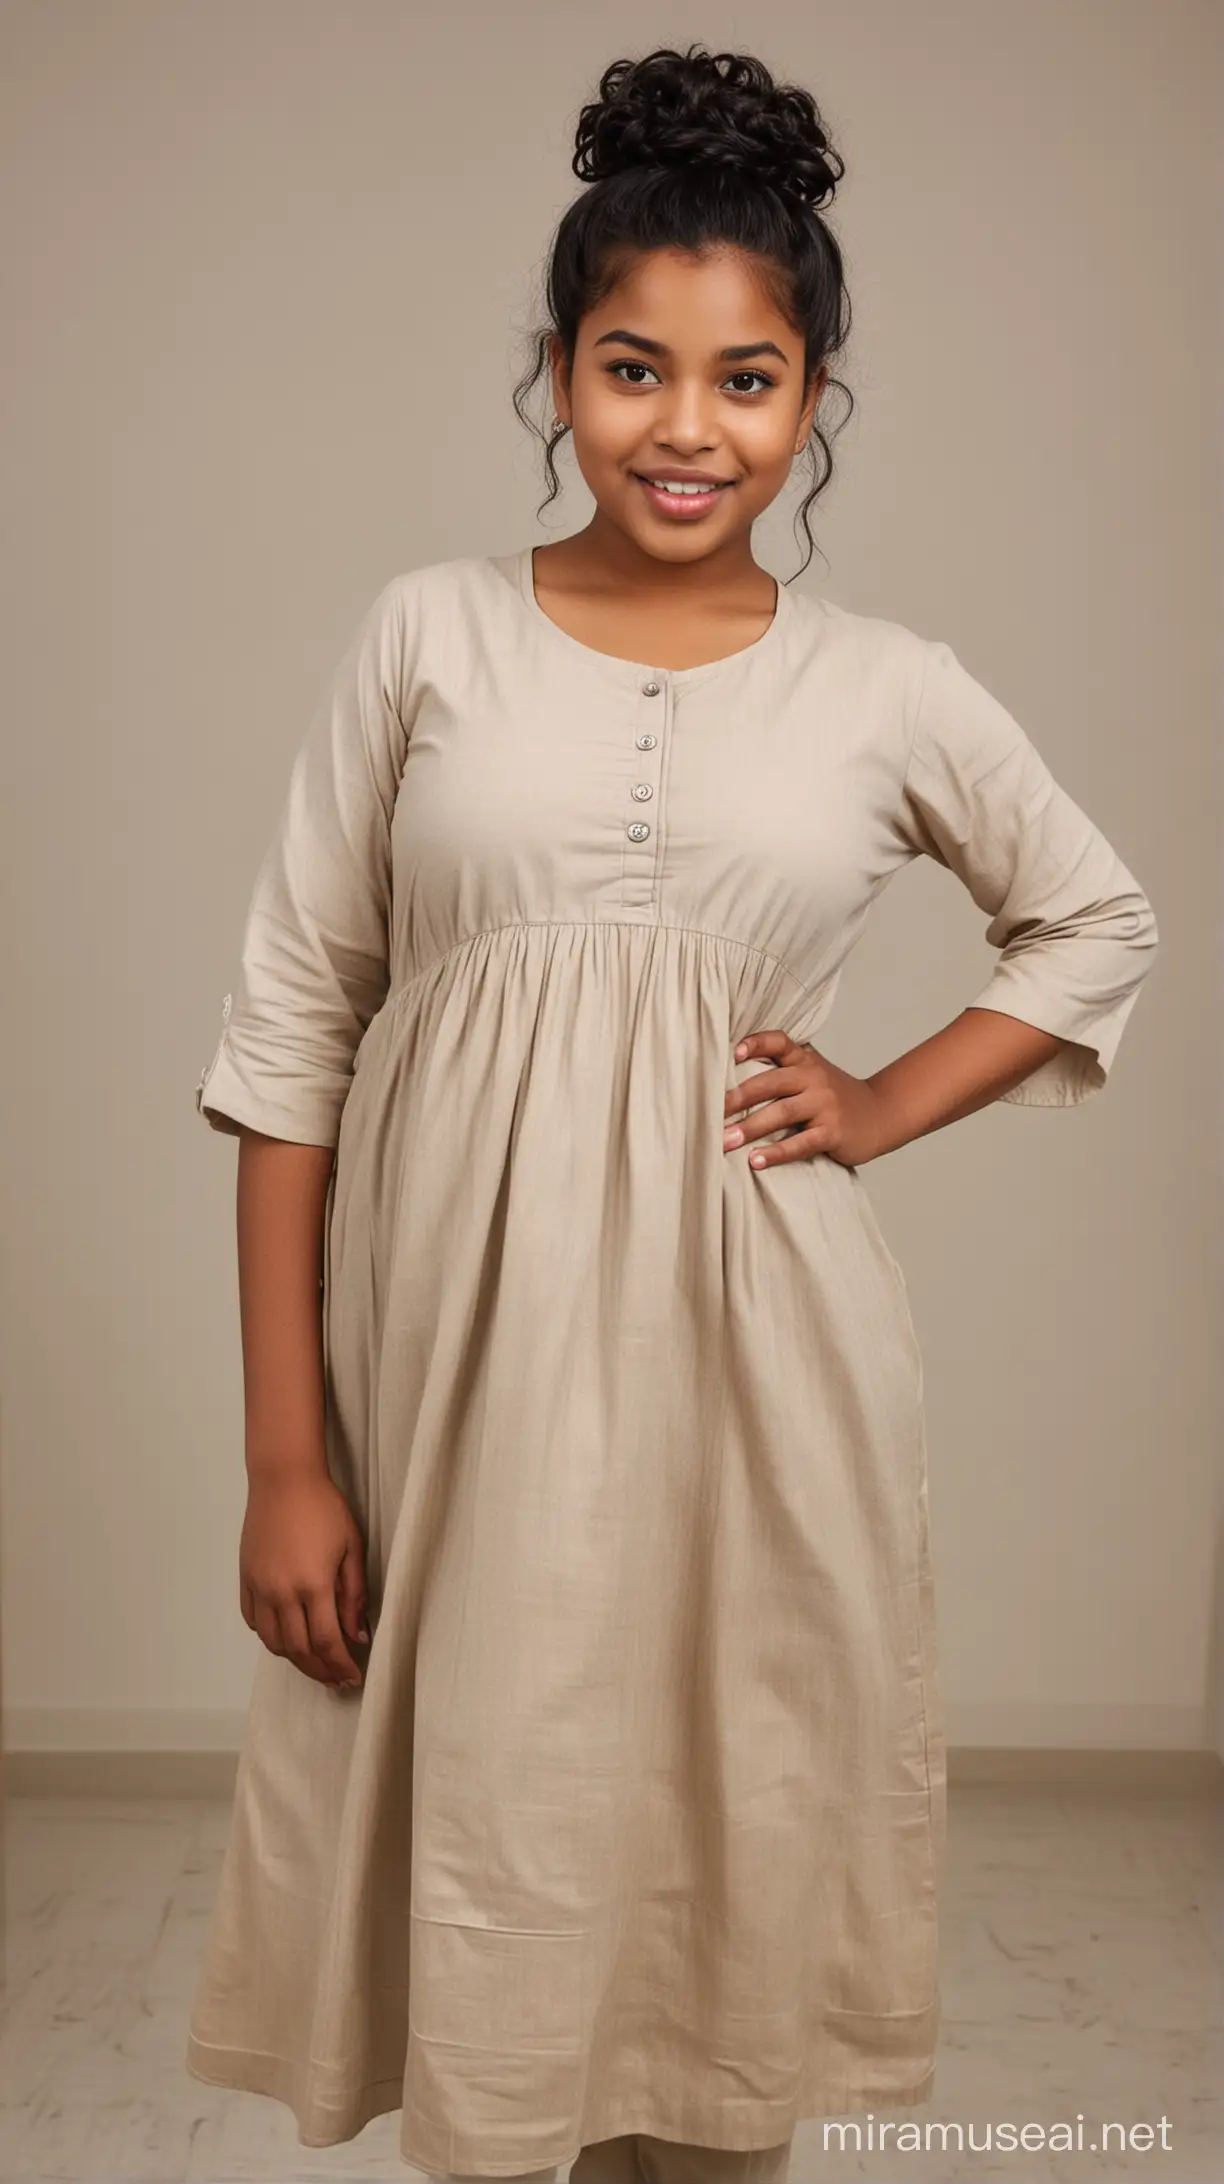 A 12 year old fat black woman with small eyes, wide lips, weak chin, small nose and long curly black hair with a bun at back who is 8 months pregnant wearing a kurti and standing in the doctor's clinic with a large belly